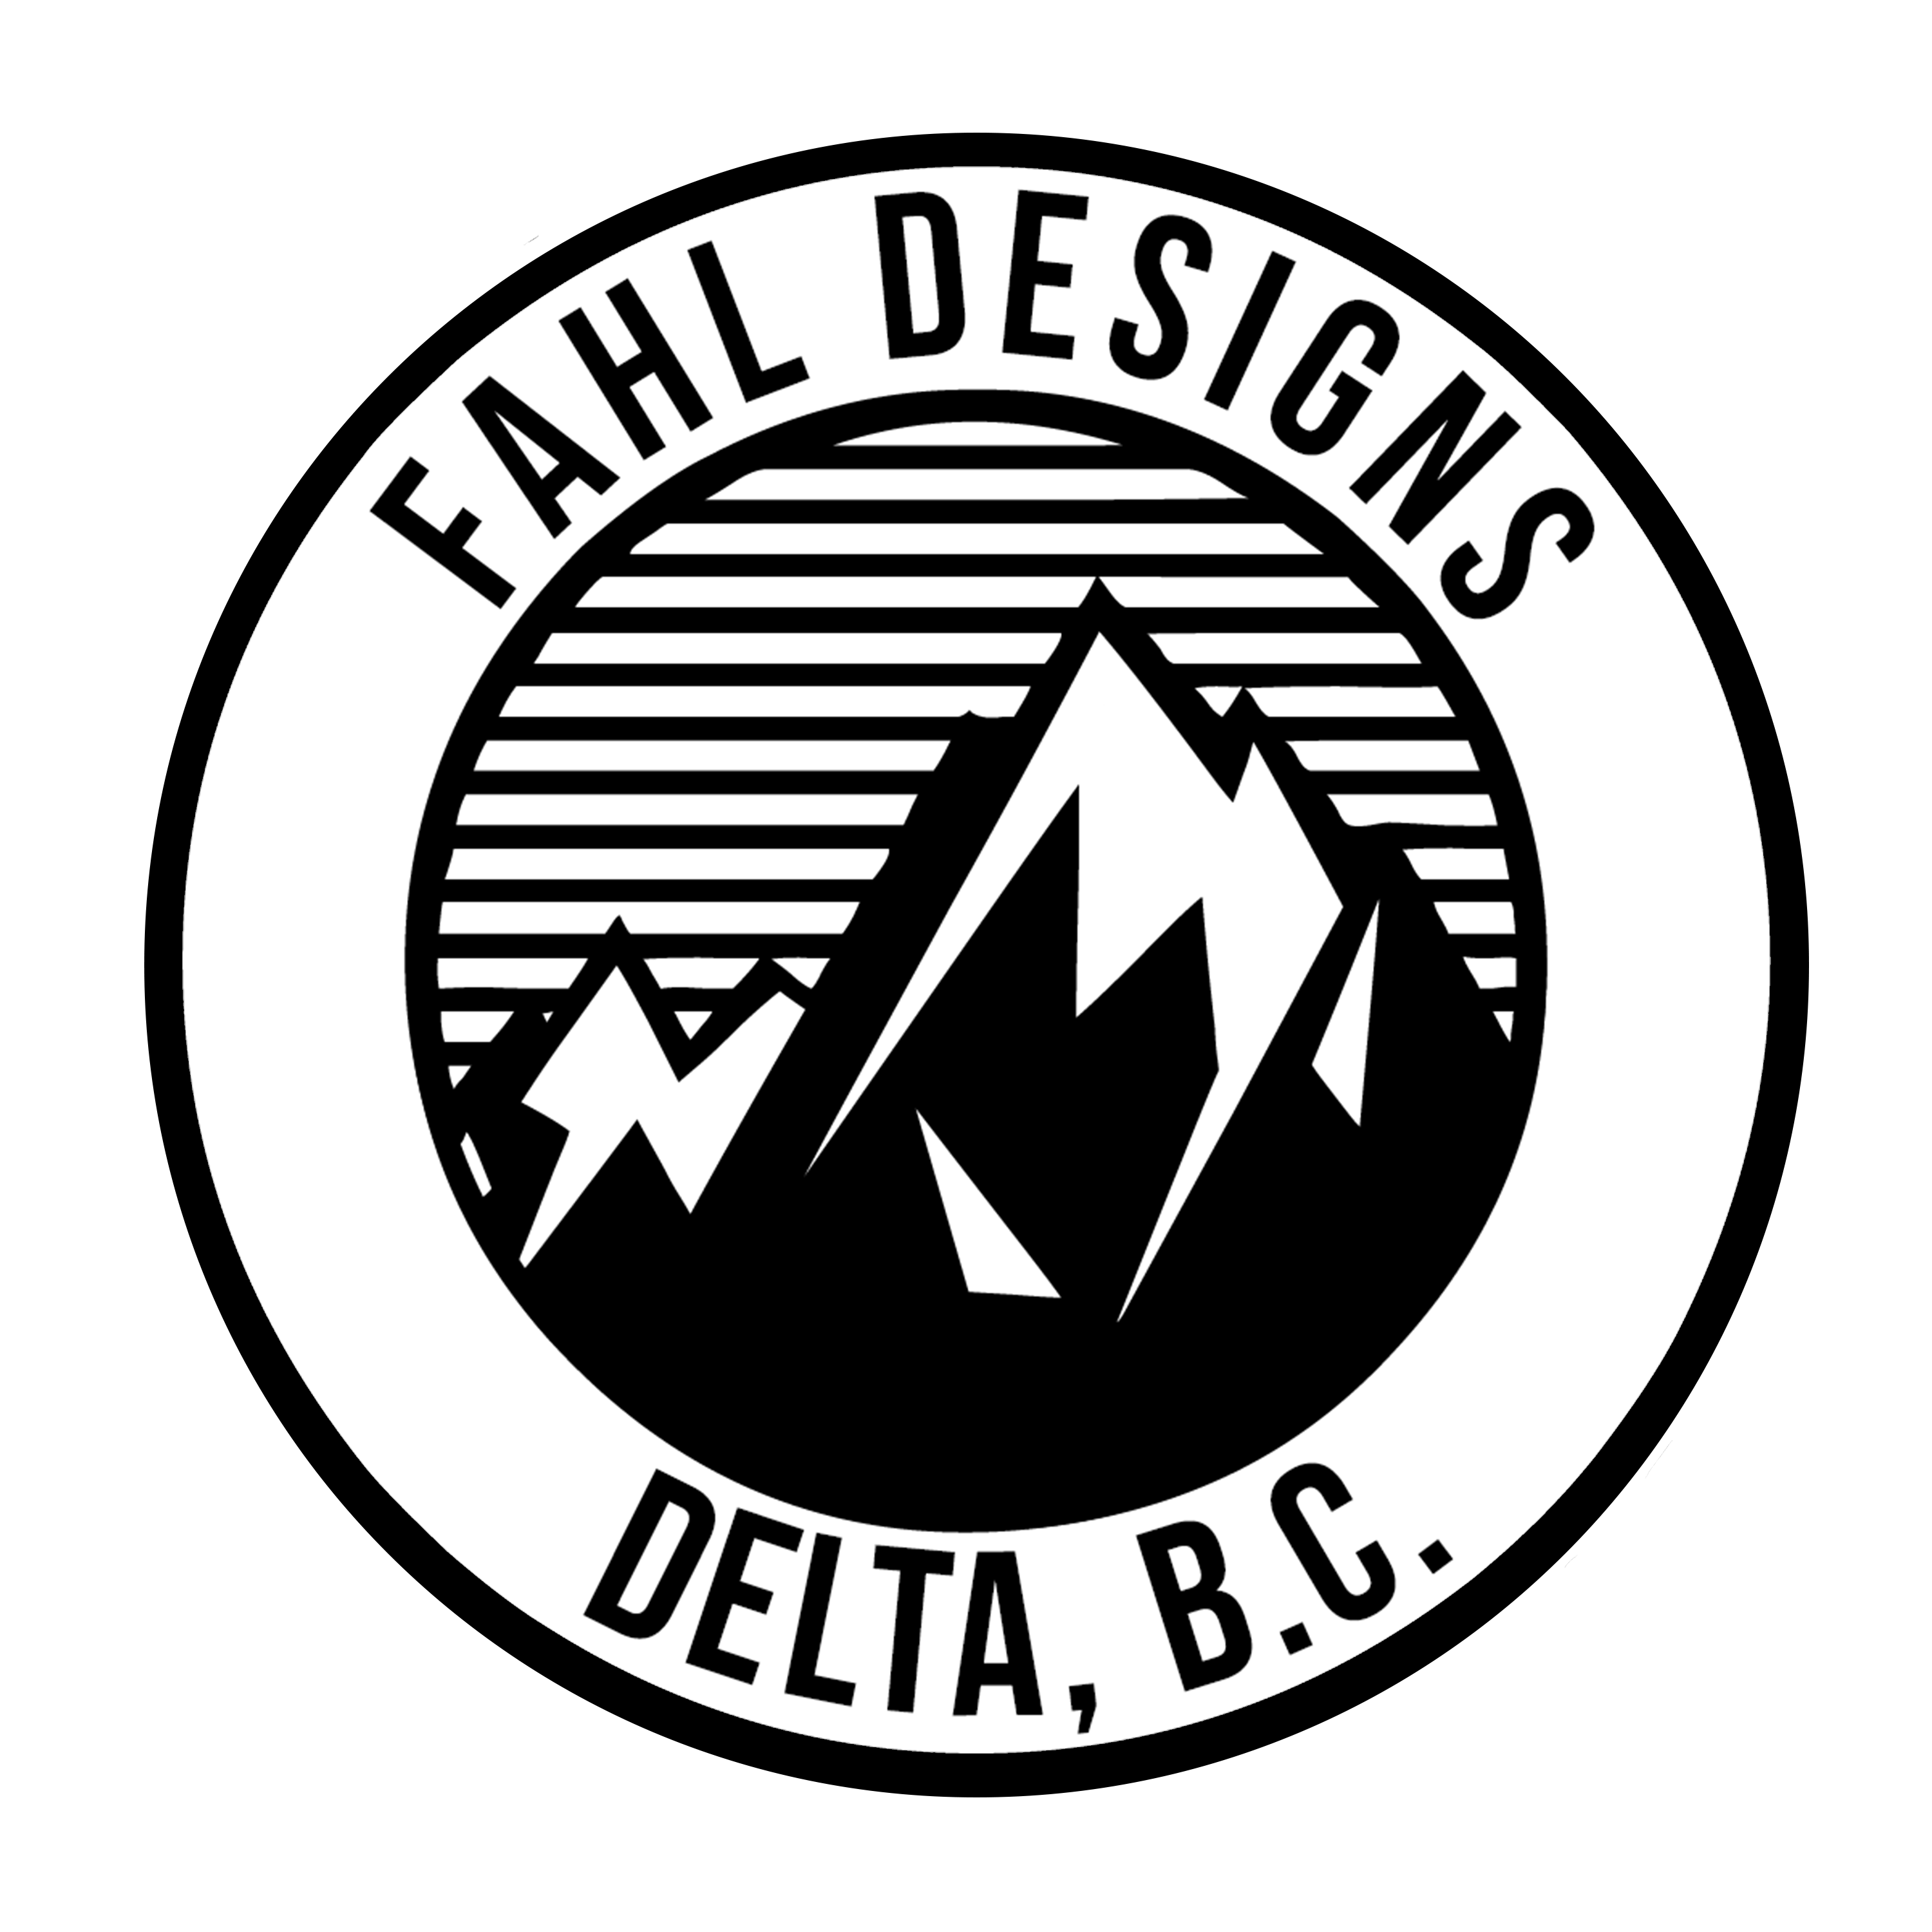 Fahl Designs profile on Qualified.One